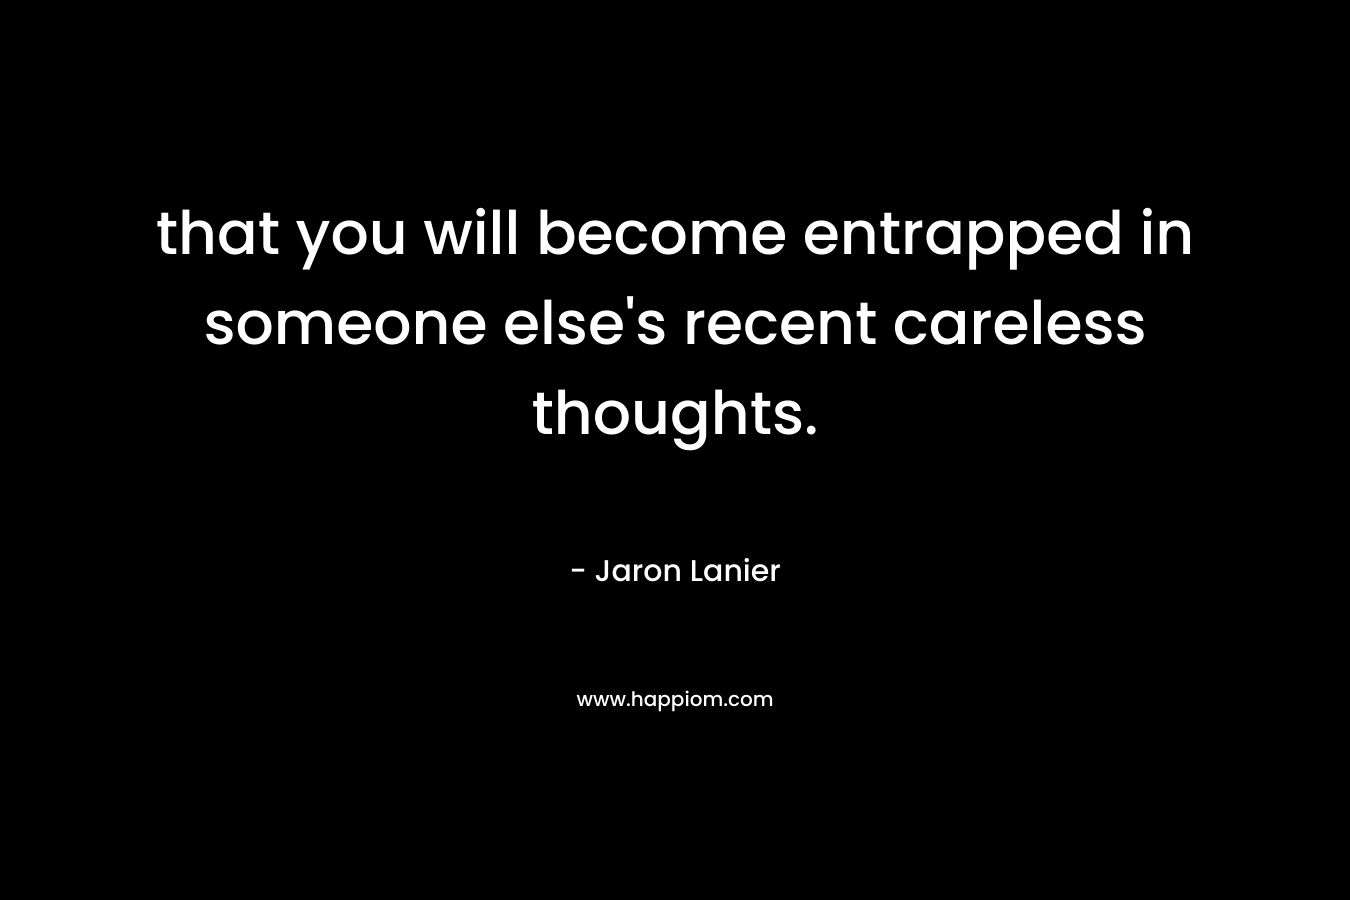 that you will become entrapped in someone else's recent careless thoughts.